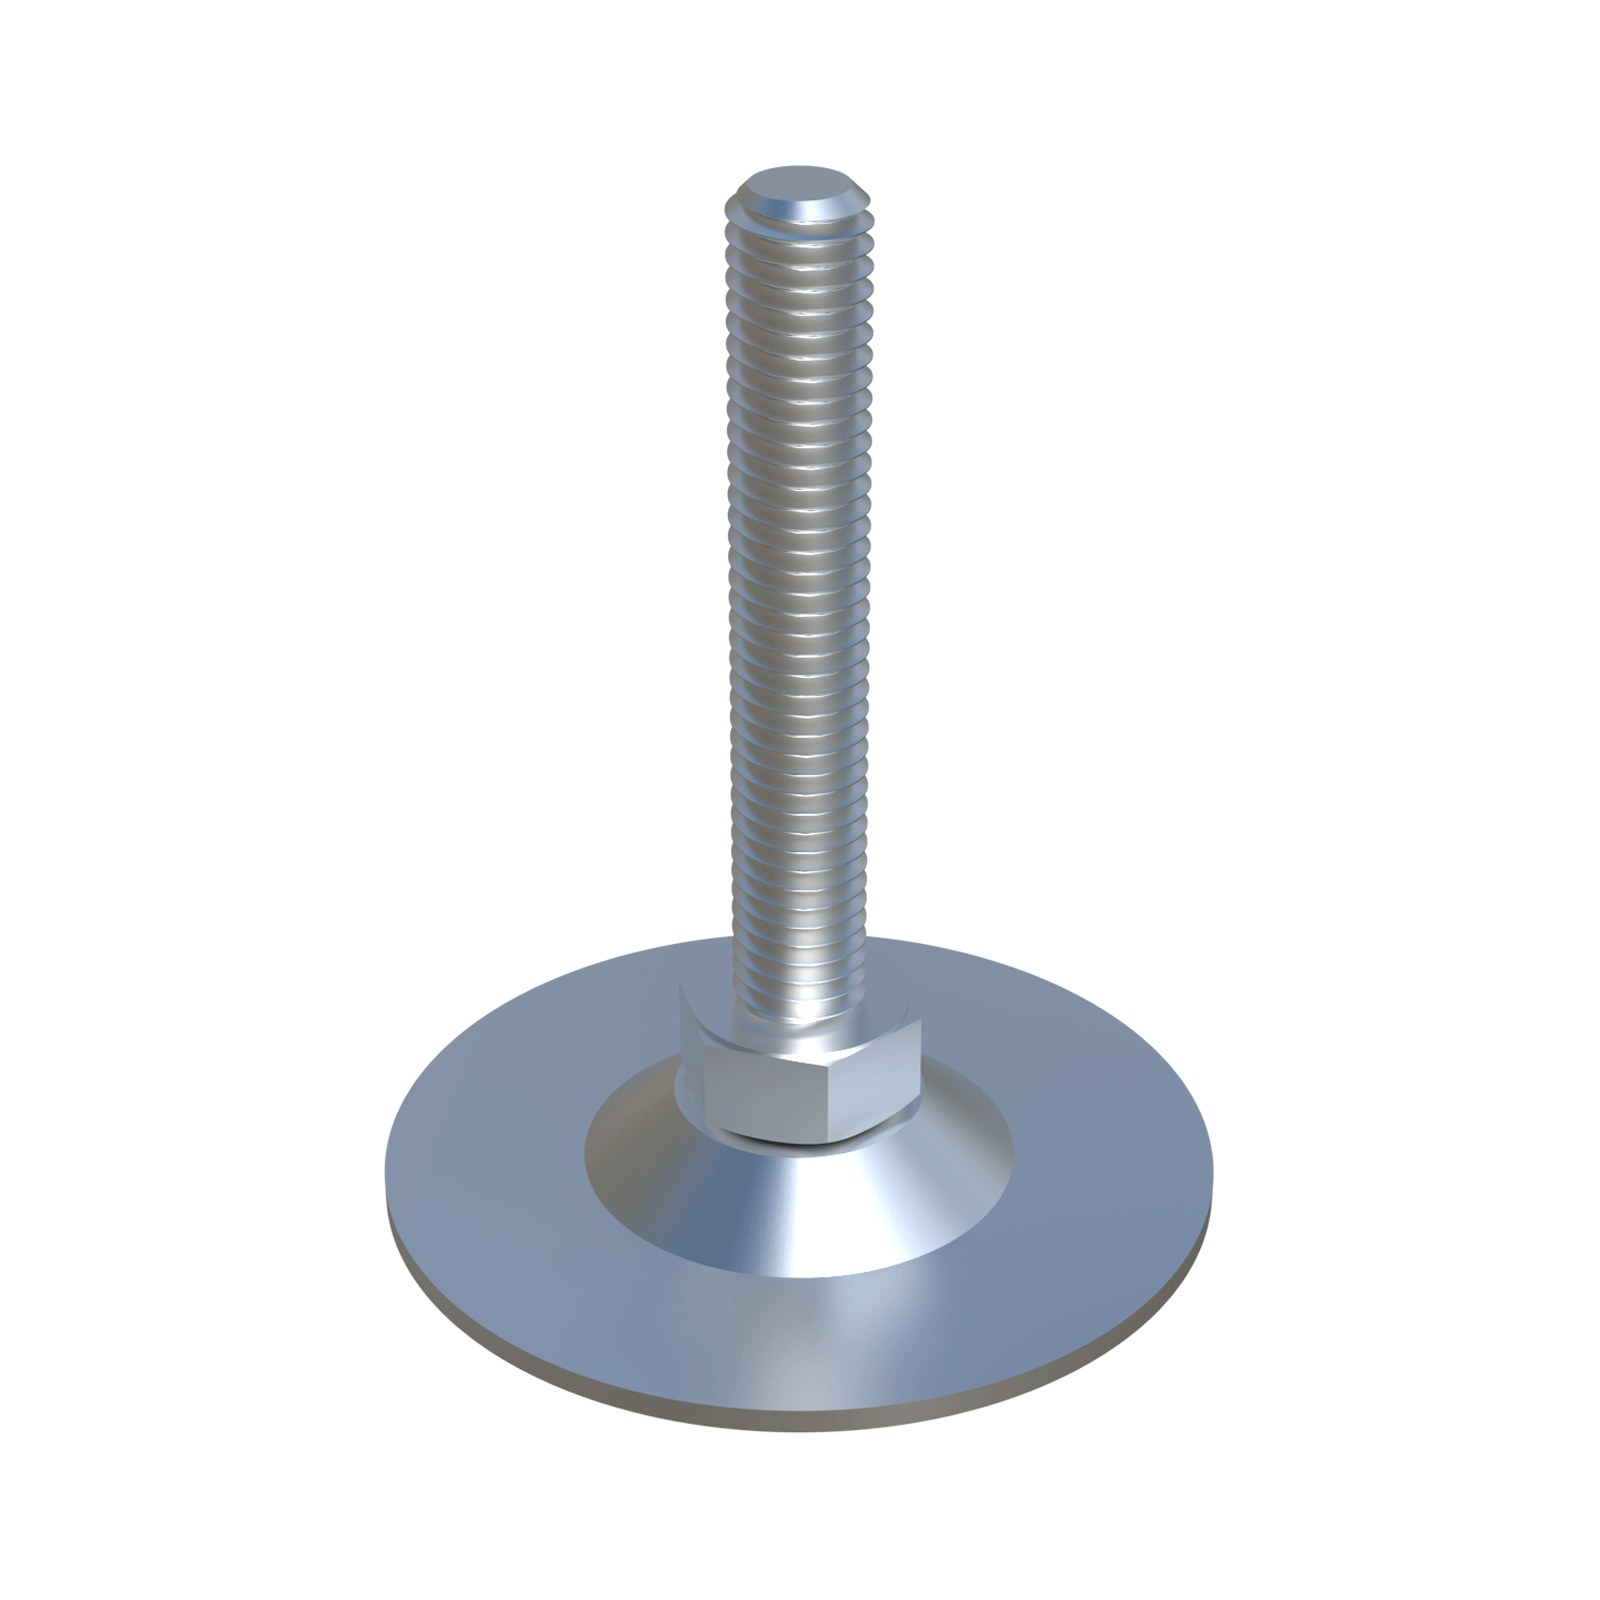 The LHVB adjustable feet are manufactured in <b>(ZCS)</b> Zinc Plated Steel and have a DIN 558-4.6-A2F <b>swivel</b> screw with a hexagonal base and an inclination range of between <b>10º and 13º</b>, according to reference. They offer a secure connection thanks to a T20 Torx screw (max. torque 3.4 Nm) that fixes the base with the screw. <br>
Regarding the base, there are two options depending on the reference: without holes and with two holes that allow it to be <b>screwed and firmly fixed to the ground</b> <i>(references ending in H)</i>.<br><br>
These feet can hold around <b>650 kg</b>, although we always recommend maintaining a safety margin. The feet must be adjusted without load and we do not recommend their use as sliders, but rather as static elements.<br><br>
If you need to protect the surface from possible scratches/bumps, we suggest attaching the protective cap <b><a href='
https://www.iscsl.co.uk/tilting-adjustable-foot-in-zinc-coated-steel/lkb/
'> LKB</a></b>, manufactured in <b>(LDPE)</b> Low-density polyethylene.<br><br>
We offer special configurations upon request:<br><br>
<i>* Other lengths and thread measurements</i>. <br>
<i>* Base in <b>(SS)</b> Stainless Steel</i>. <br>
<i>* <b>Hexagonal slot</b> for Allen key at the upper end of the thread</i>.